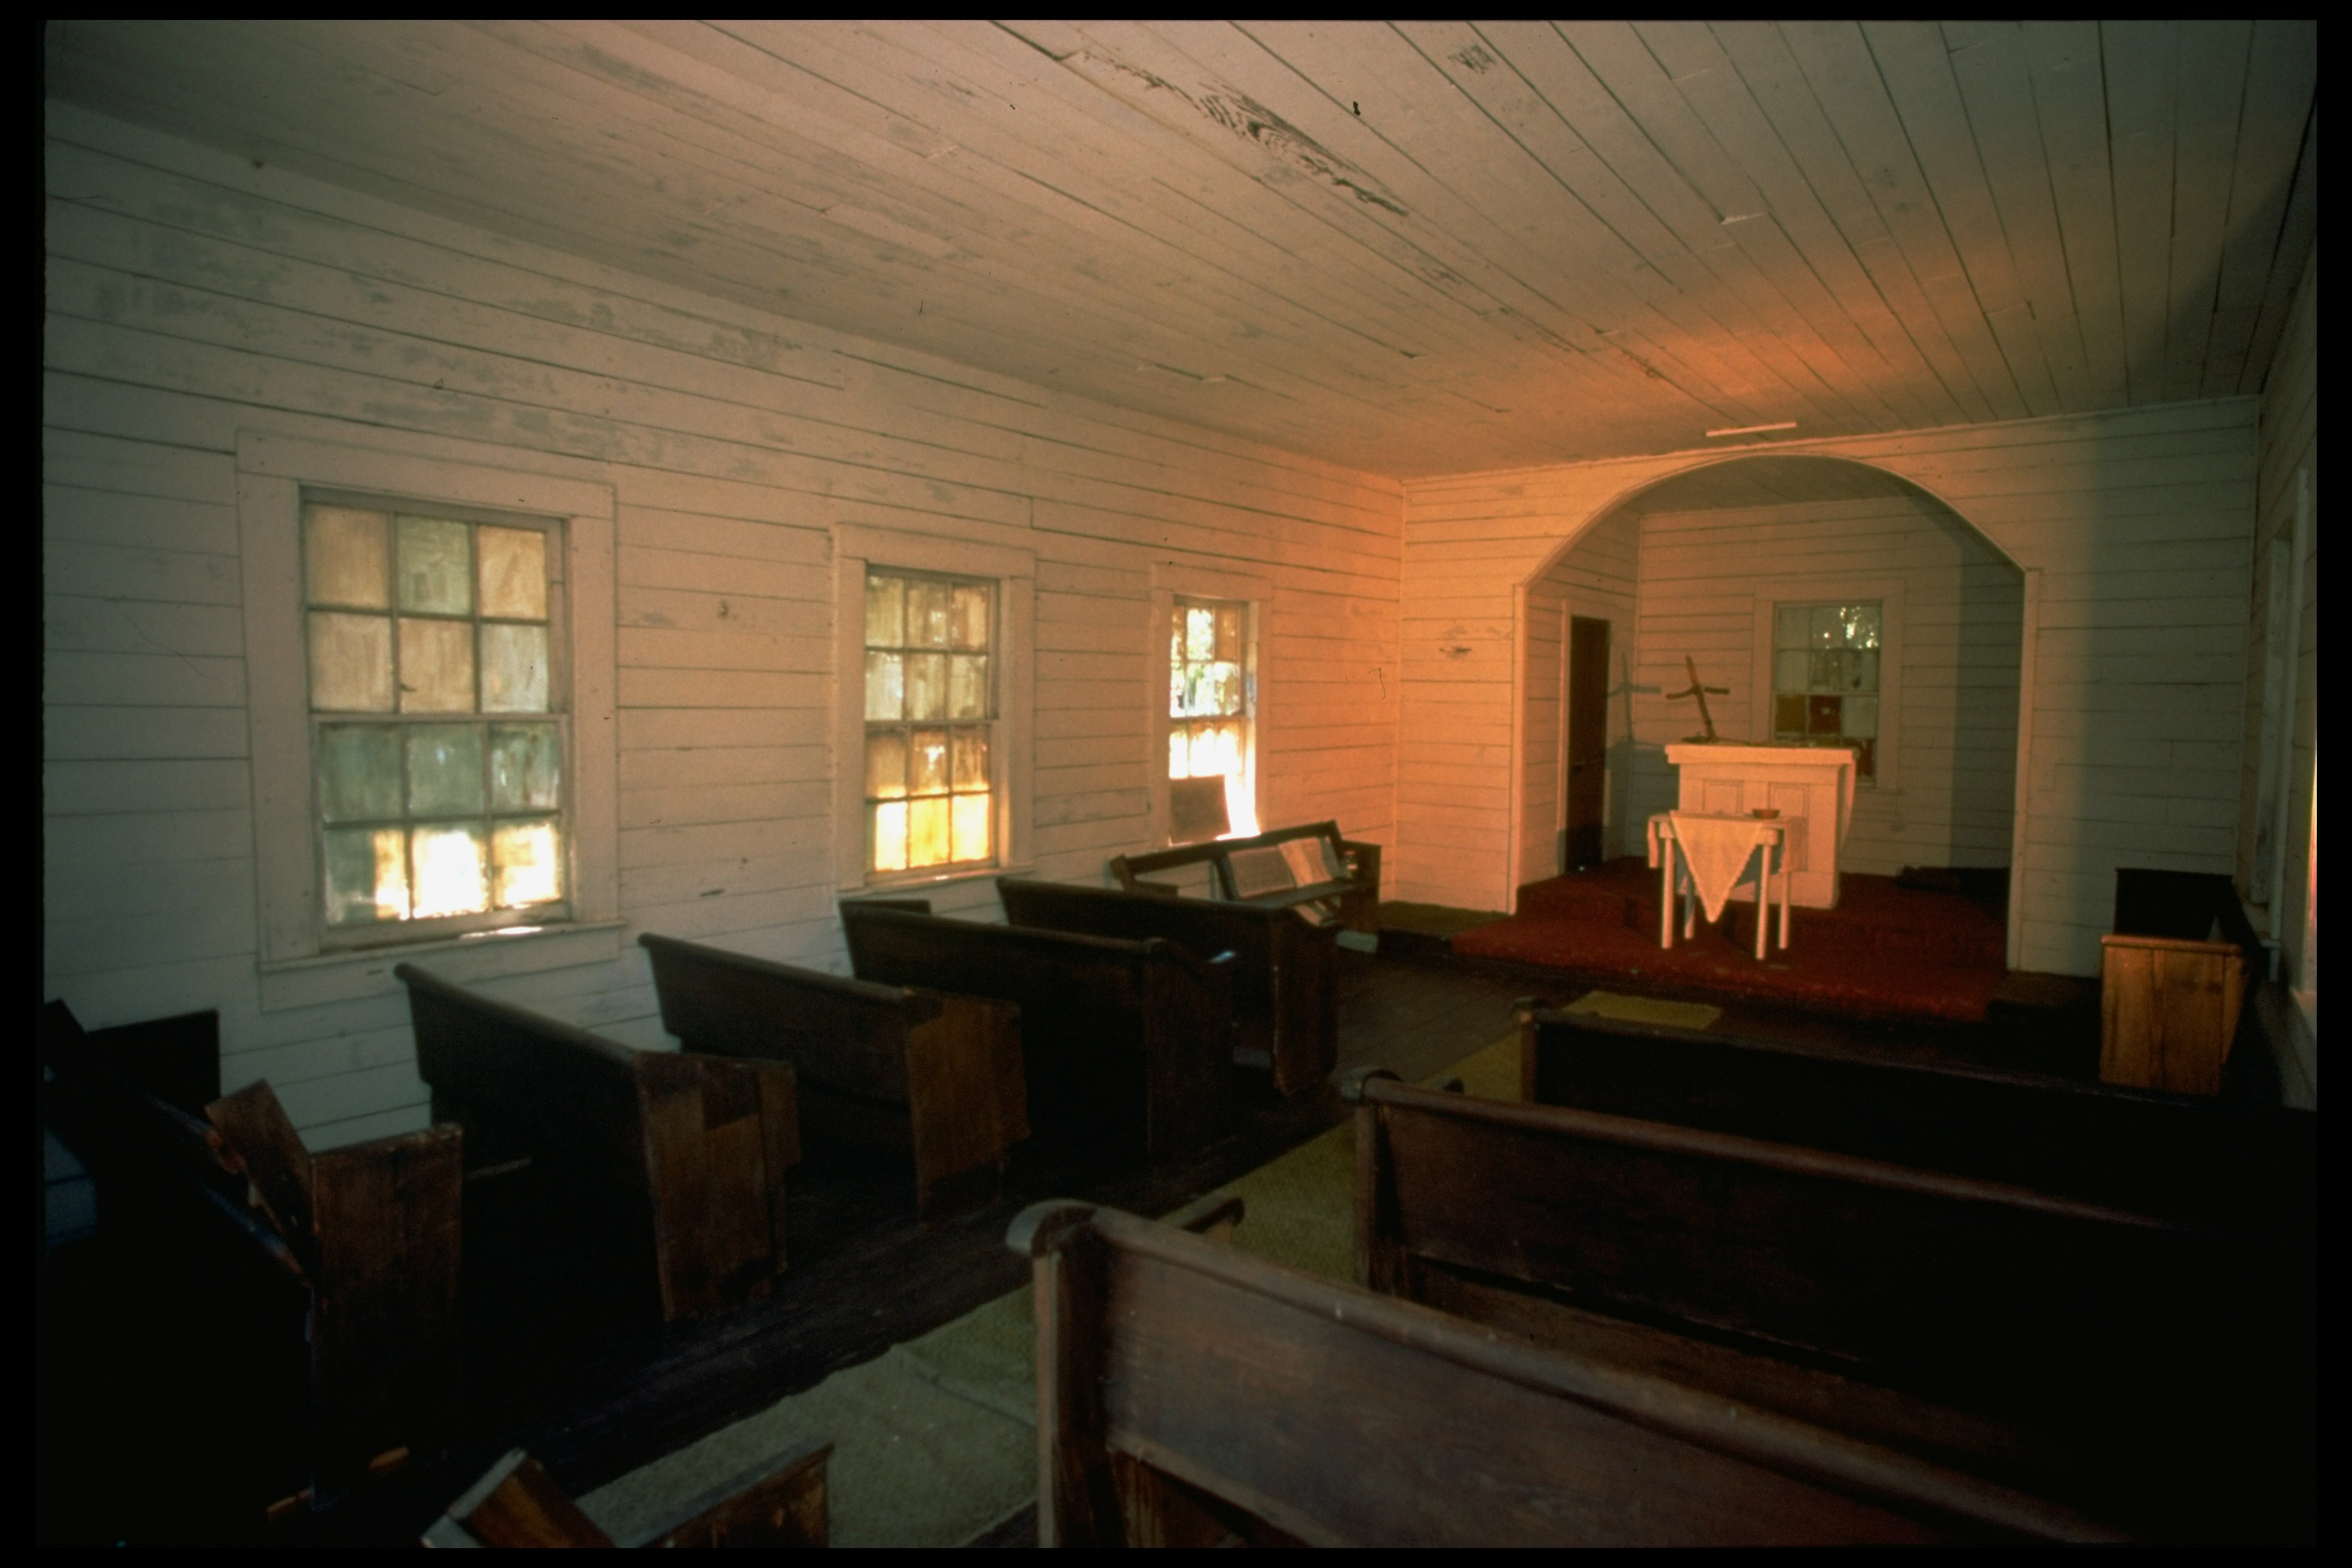 Inside the First African Baptist Church where John F. Kennedy Jr. and Carolyn Bessette held their secret wedding on Cumberland Island off the coast of Georgia in September 1996 | Source: Getty Images